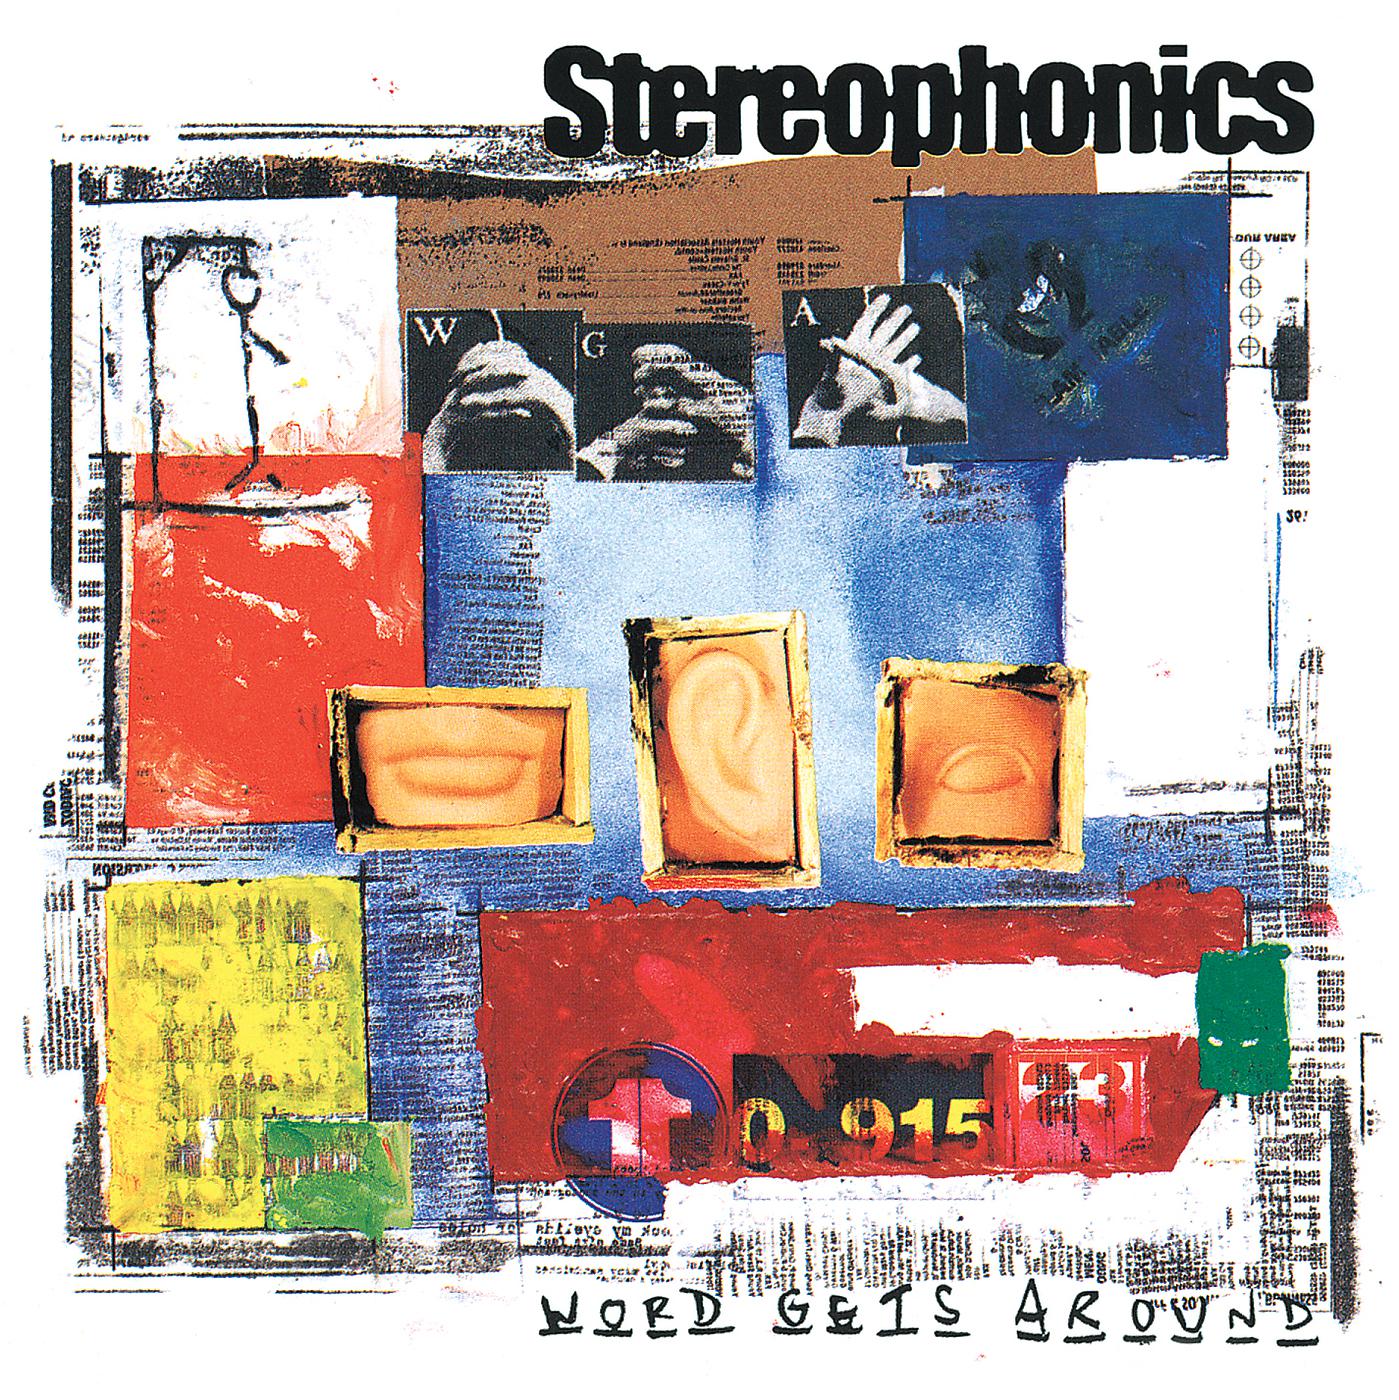 Word get around. Stereophonics Word gets around. Stereophonics - Word gets around (1997). Stereophonics albums. Stereophonics LP.